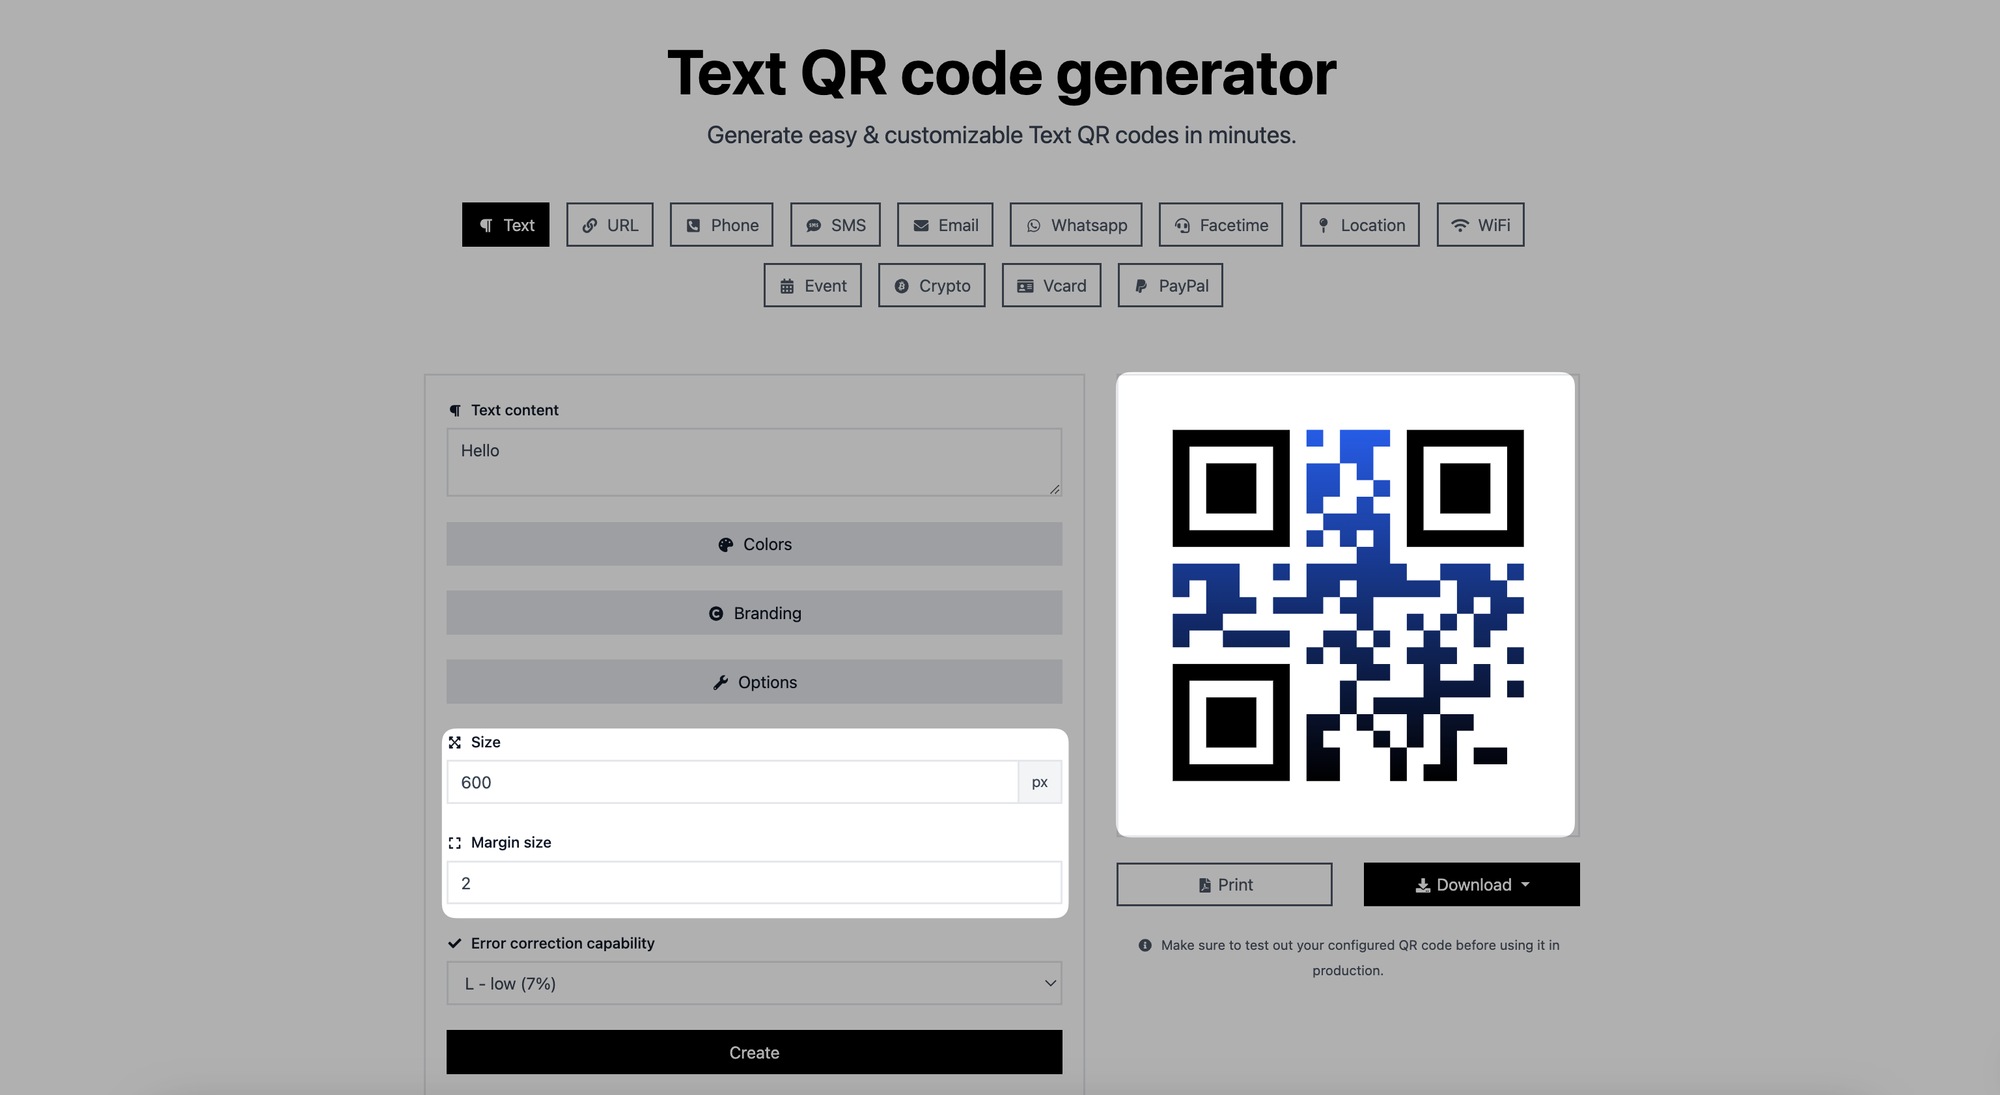 adjusting size and margin size of a qr code